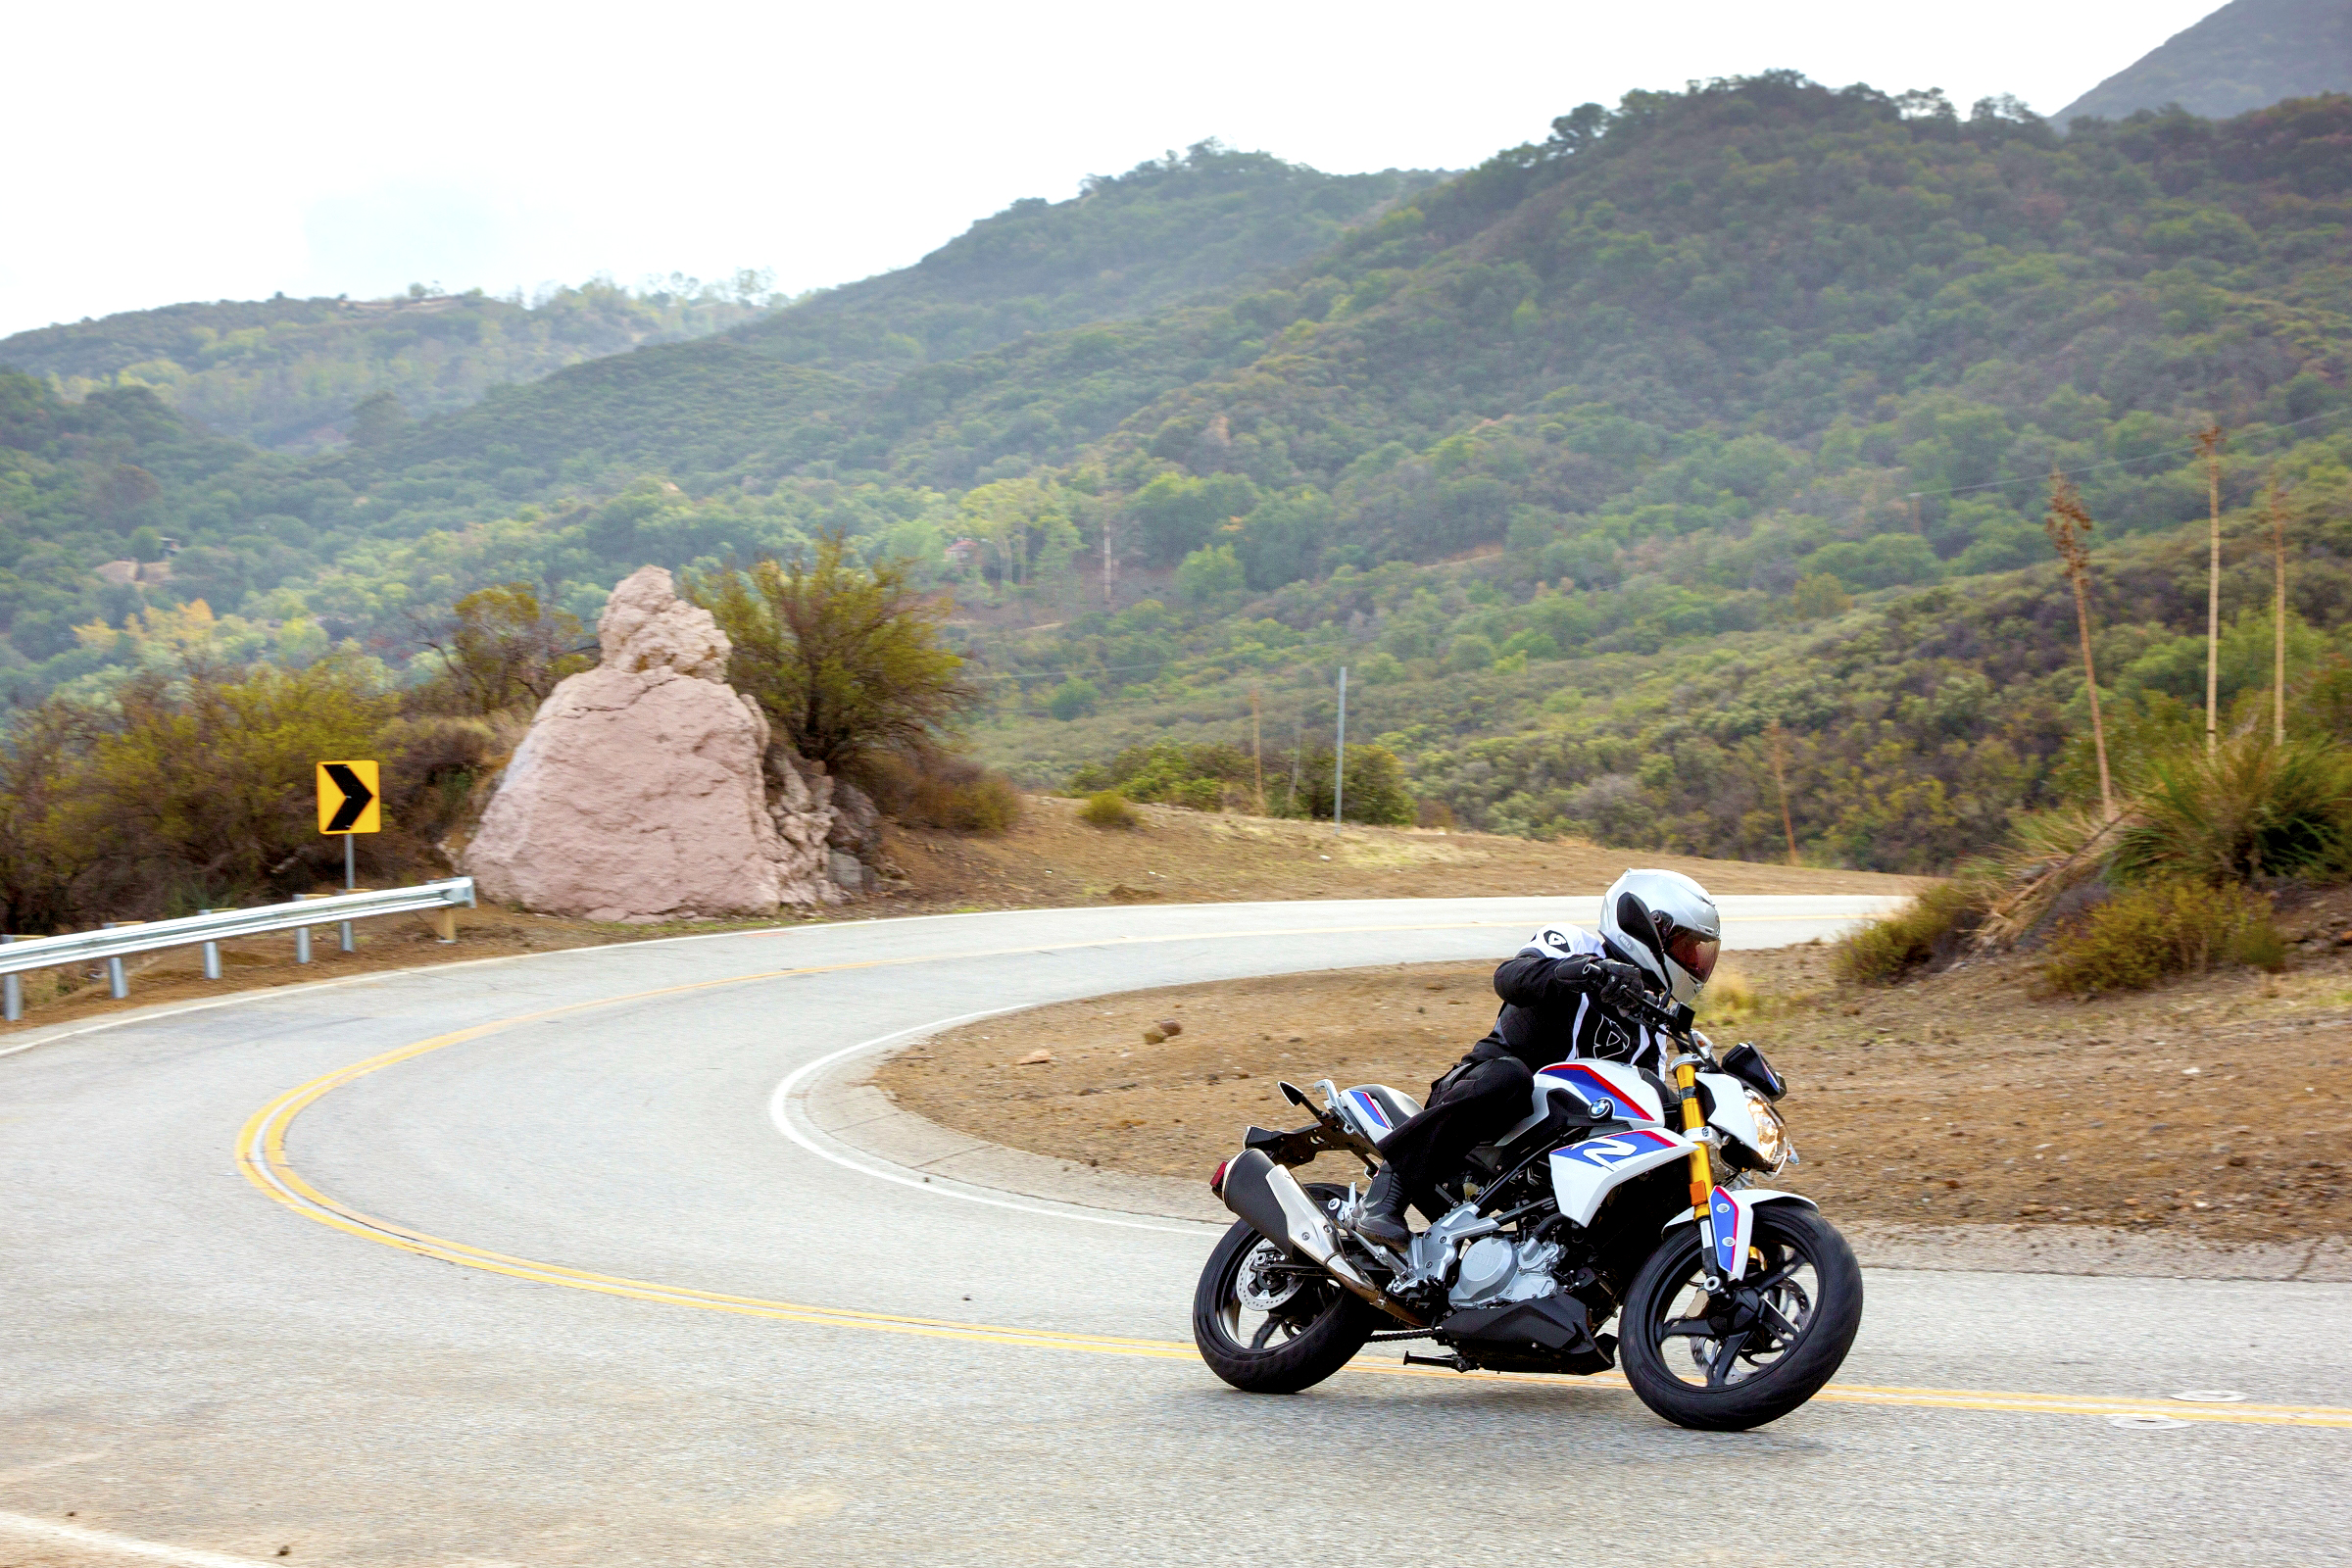 First ride review of the BMW G 310 R – The Ride So Far